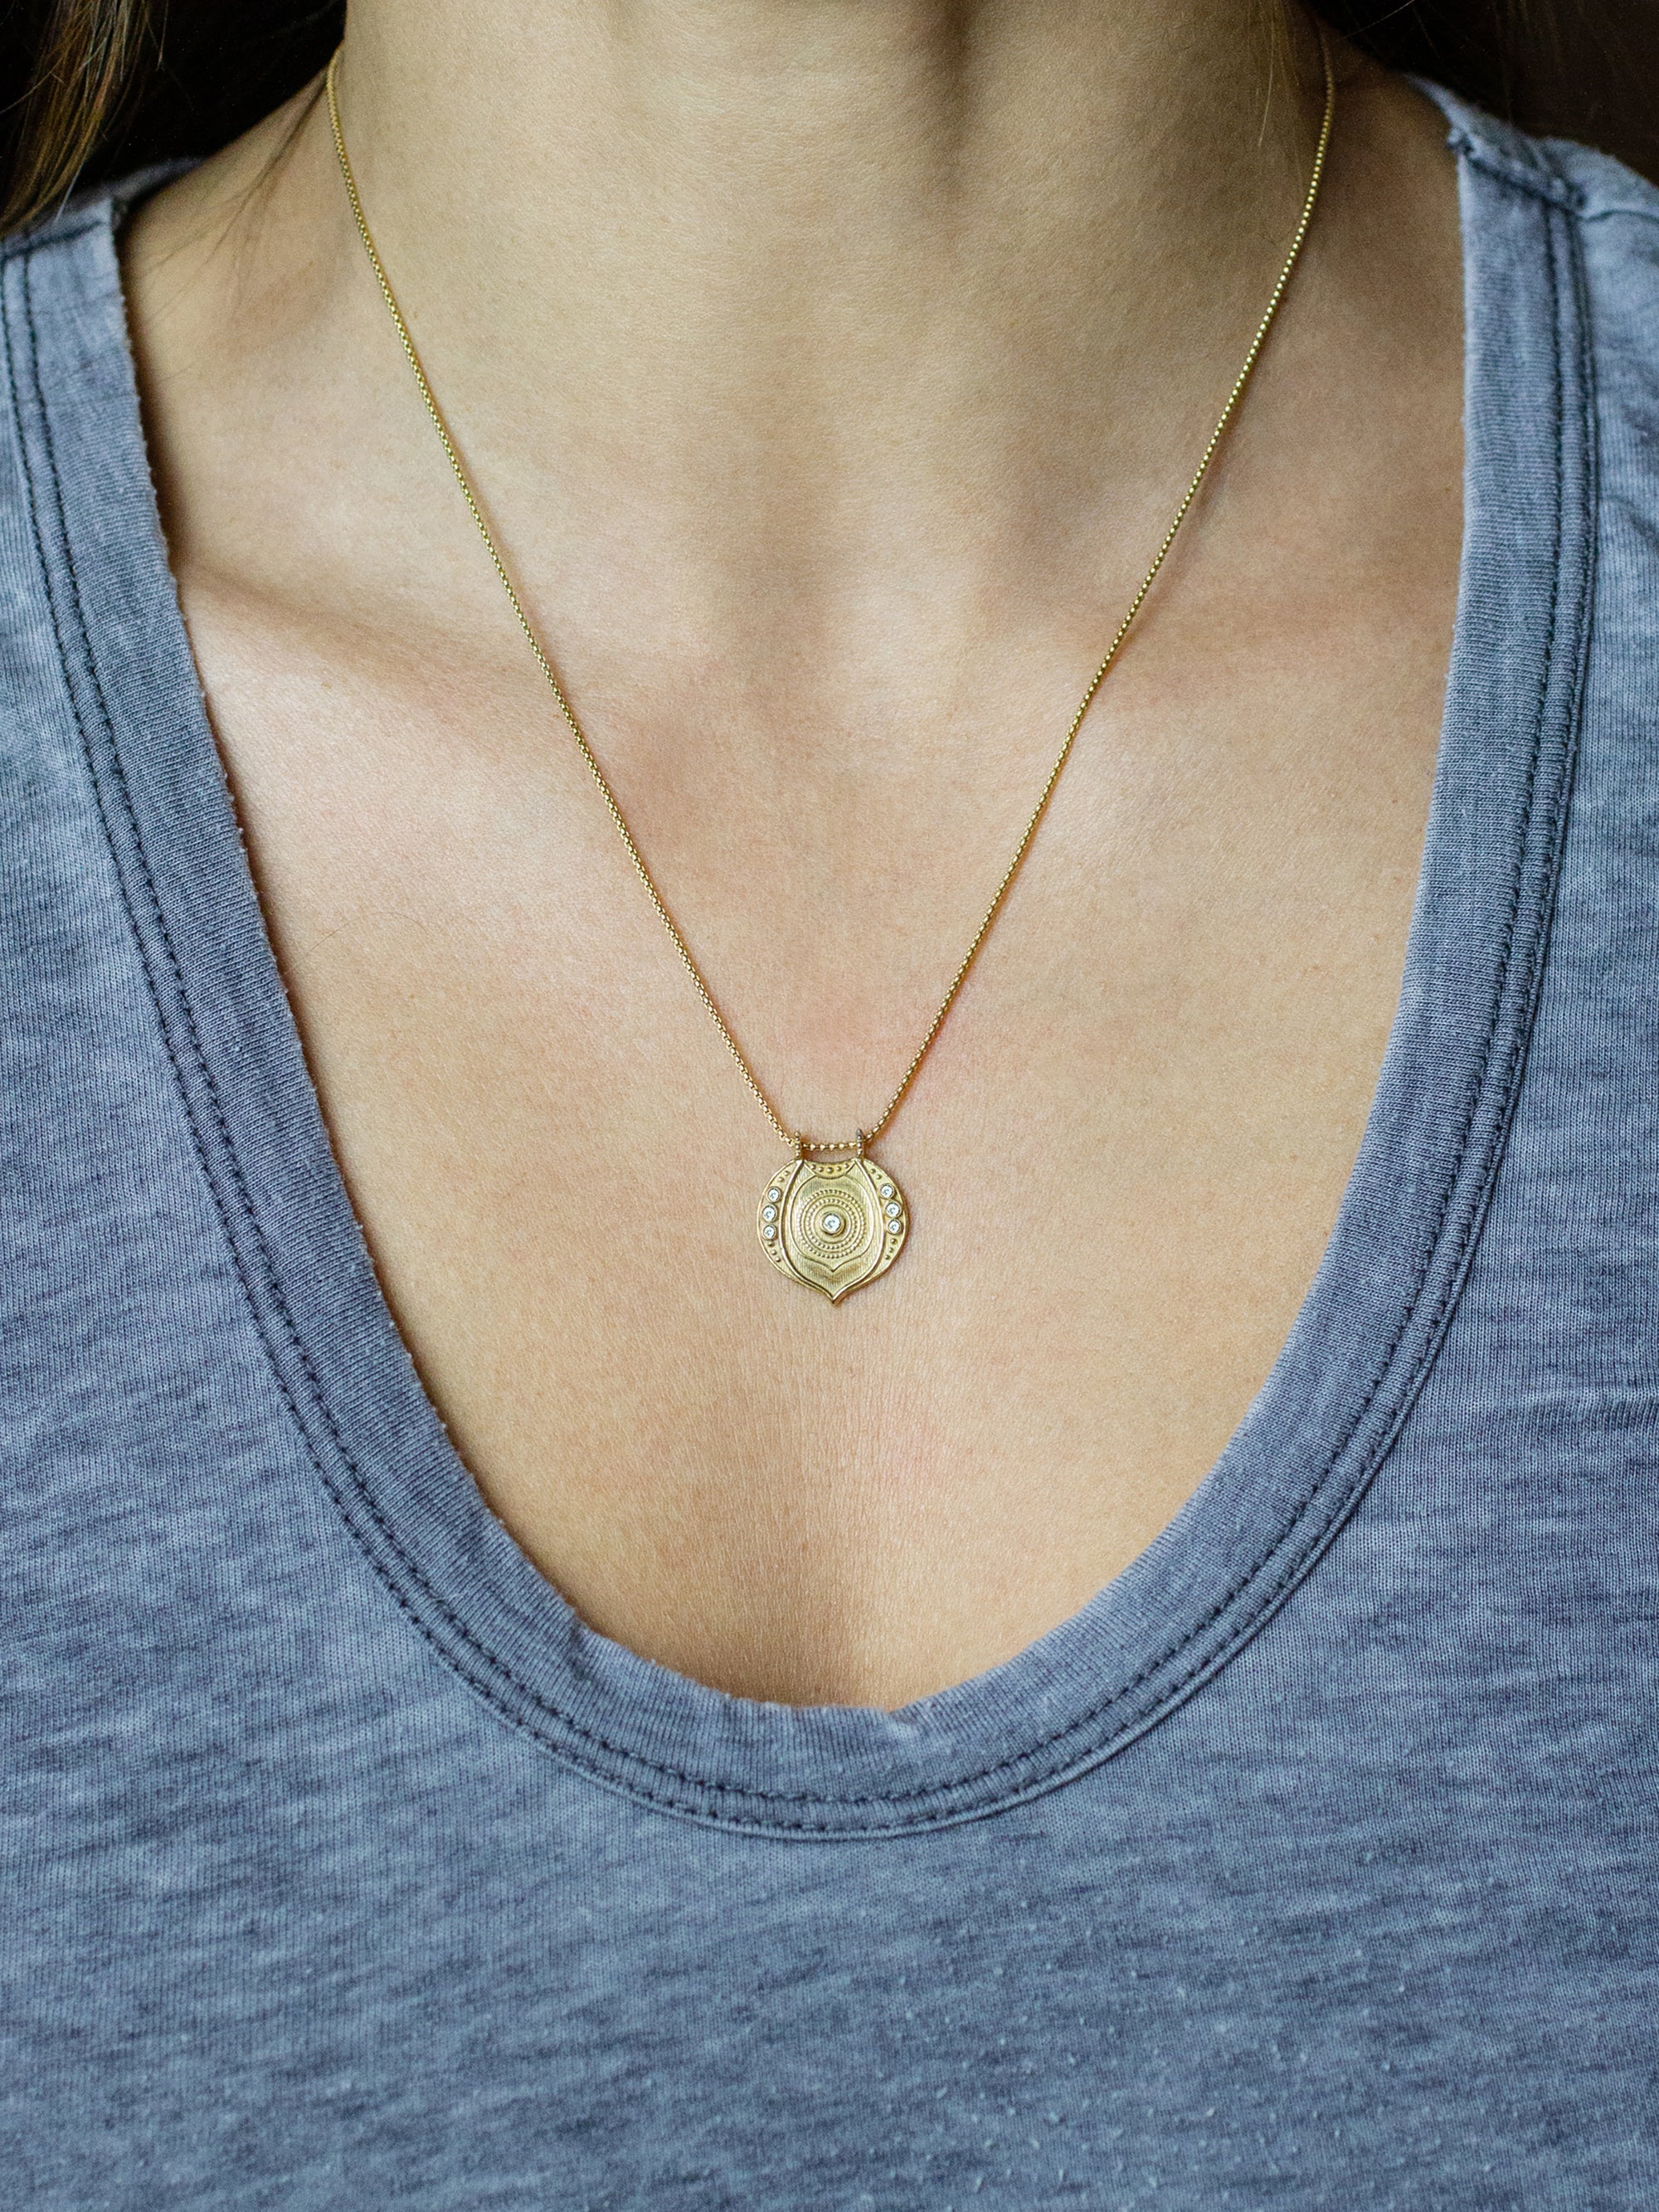 Aura Necklace - "live in light"